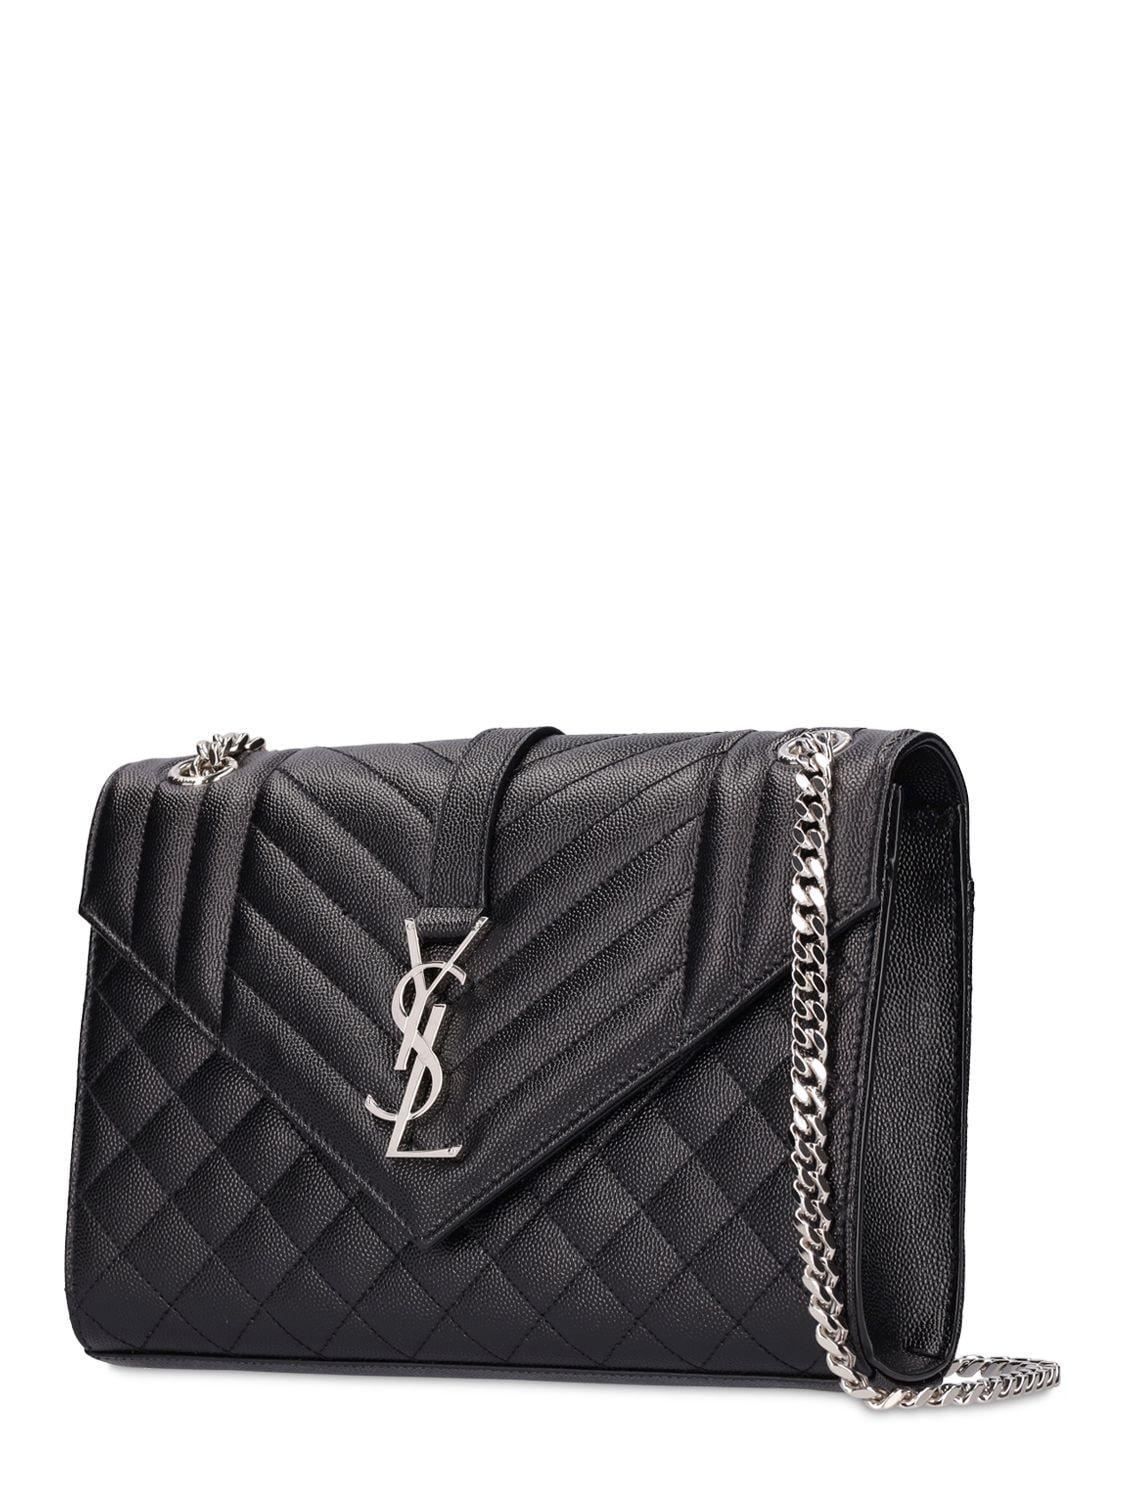 YSL Kate vs. Envelope vs. Sunset: Which YSL Bag is the Best